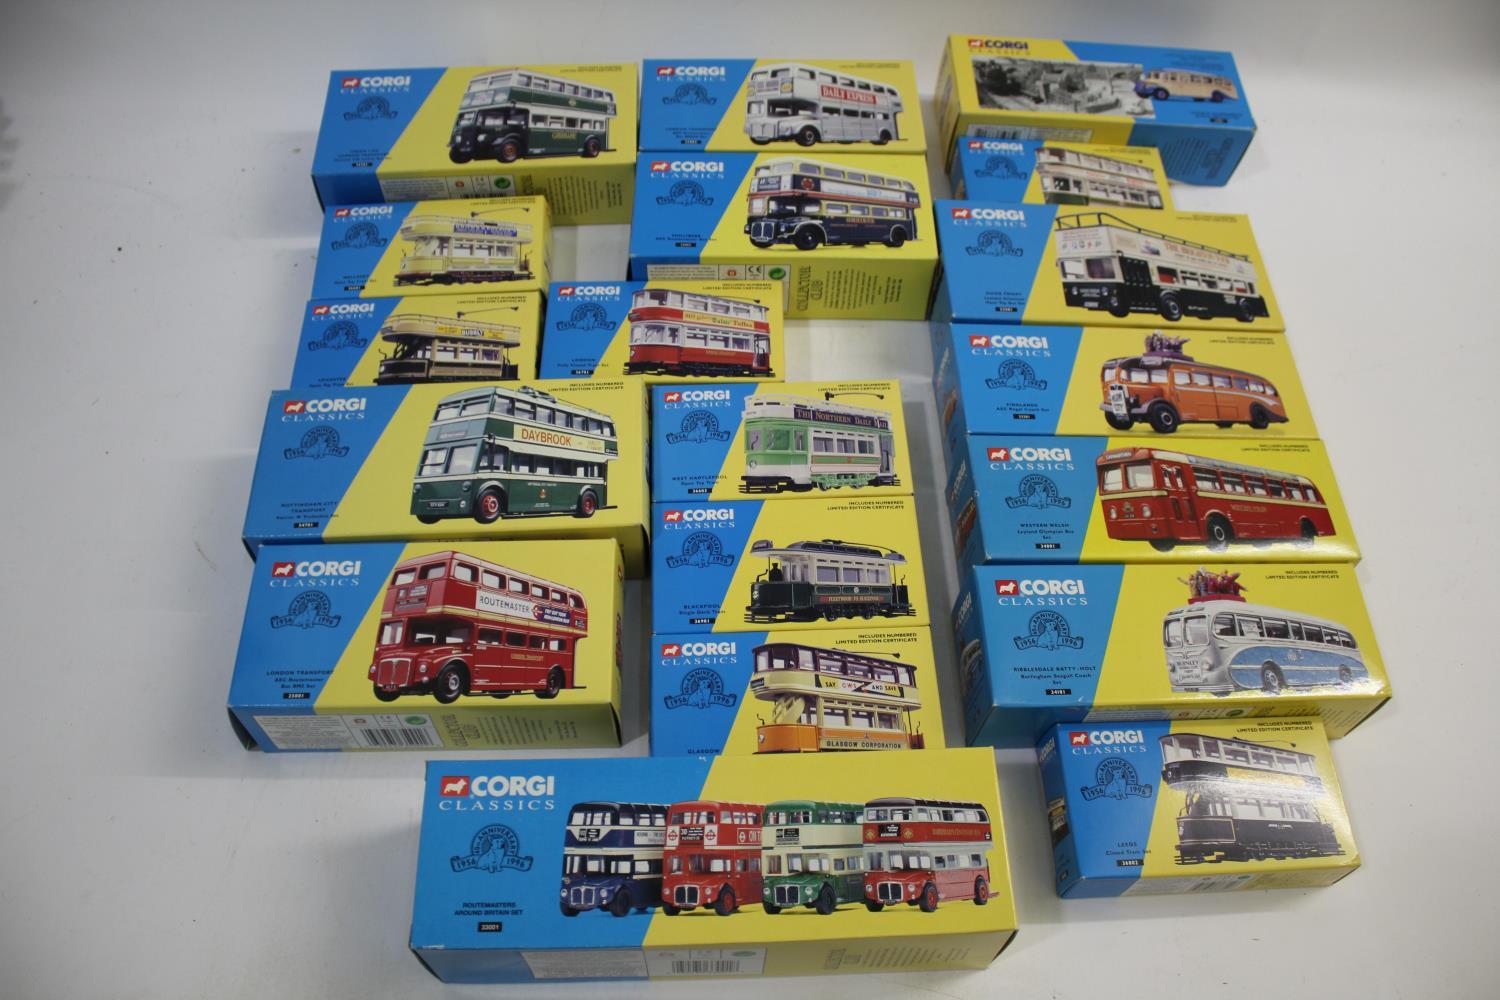 CORGI CLASSICS - BOXED BUSES 19 boxed buses including 33001 Routemaster Set, 35201 Green Line, 35001